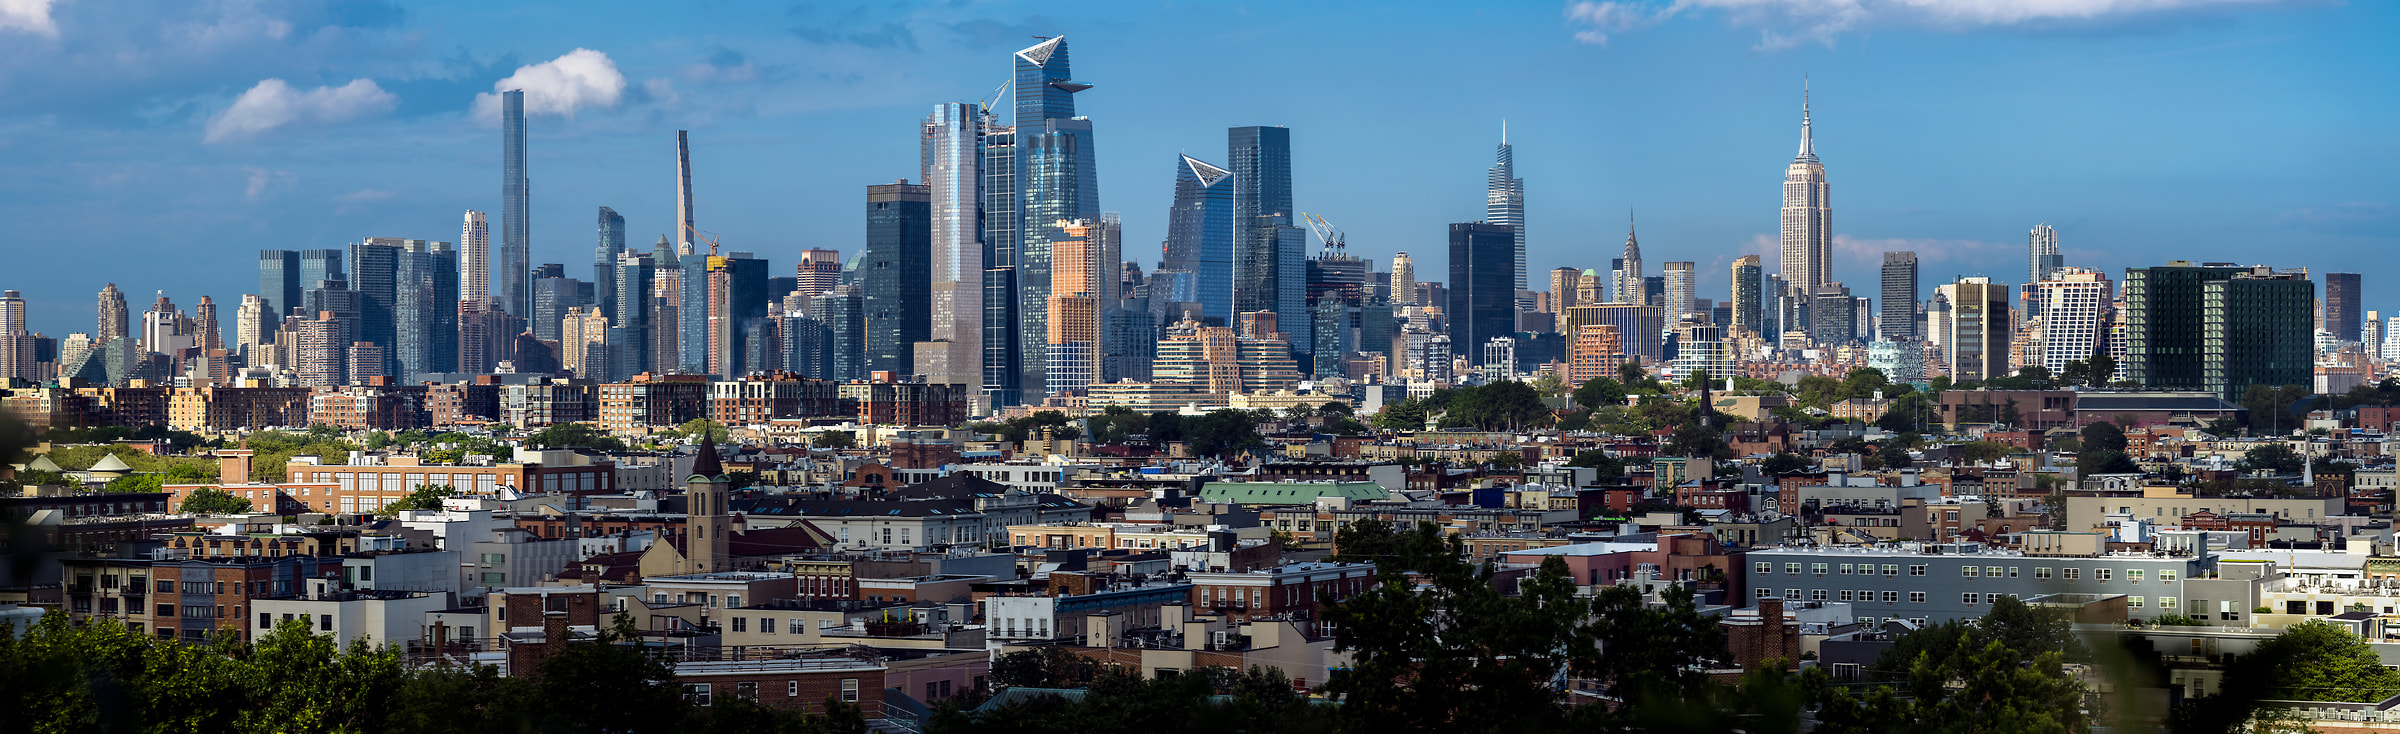 398 megapixels! A very high resolution, large-format VAST photo print of the Hudson Yards skyline; cityscape photograph created by Beyti Barbaros in Riverview-Fisk Park, Jersey City, New Jersey.